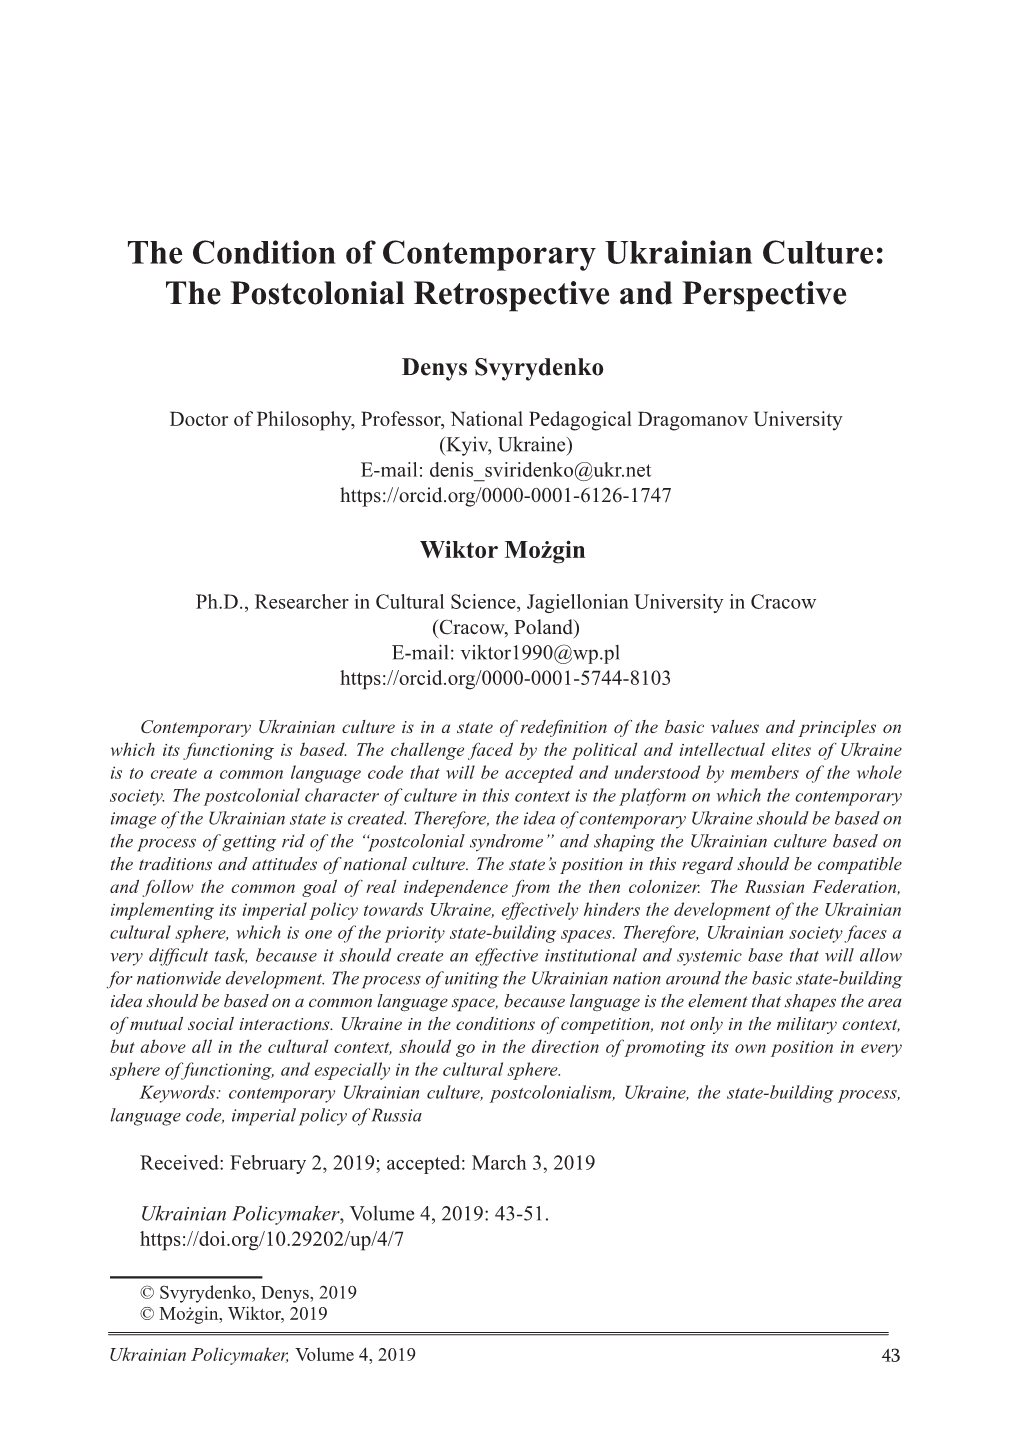 The Condition of Contemporary Ukrainian Culture: the Postcolonial Retrospective and Perspective